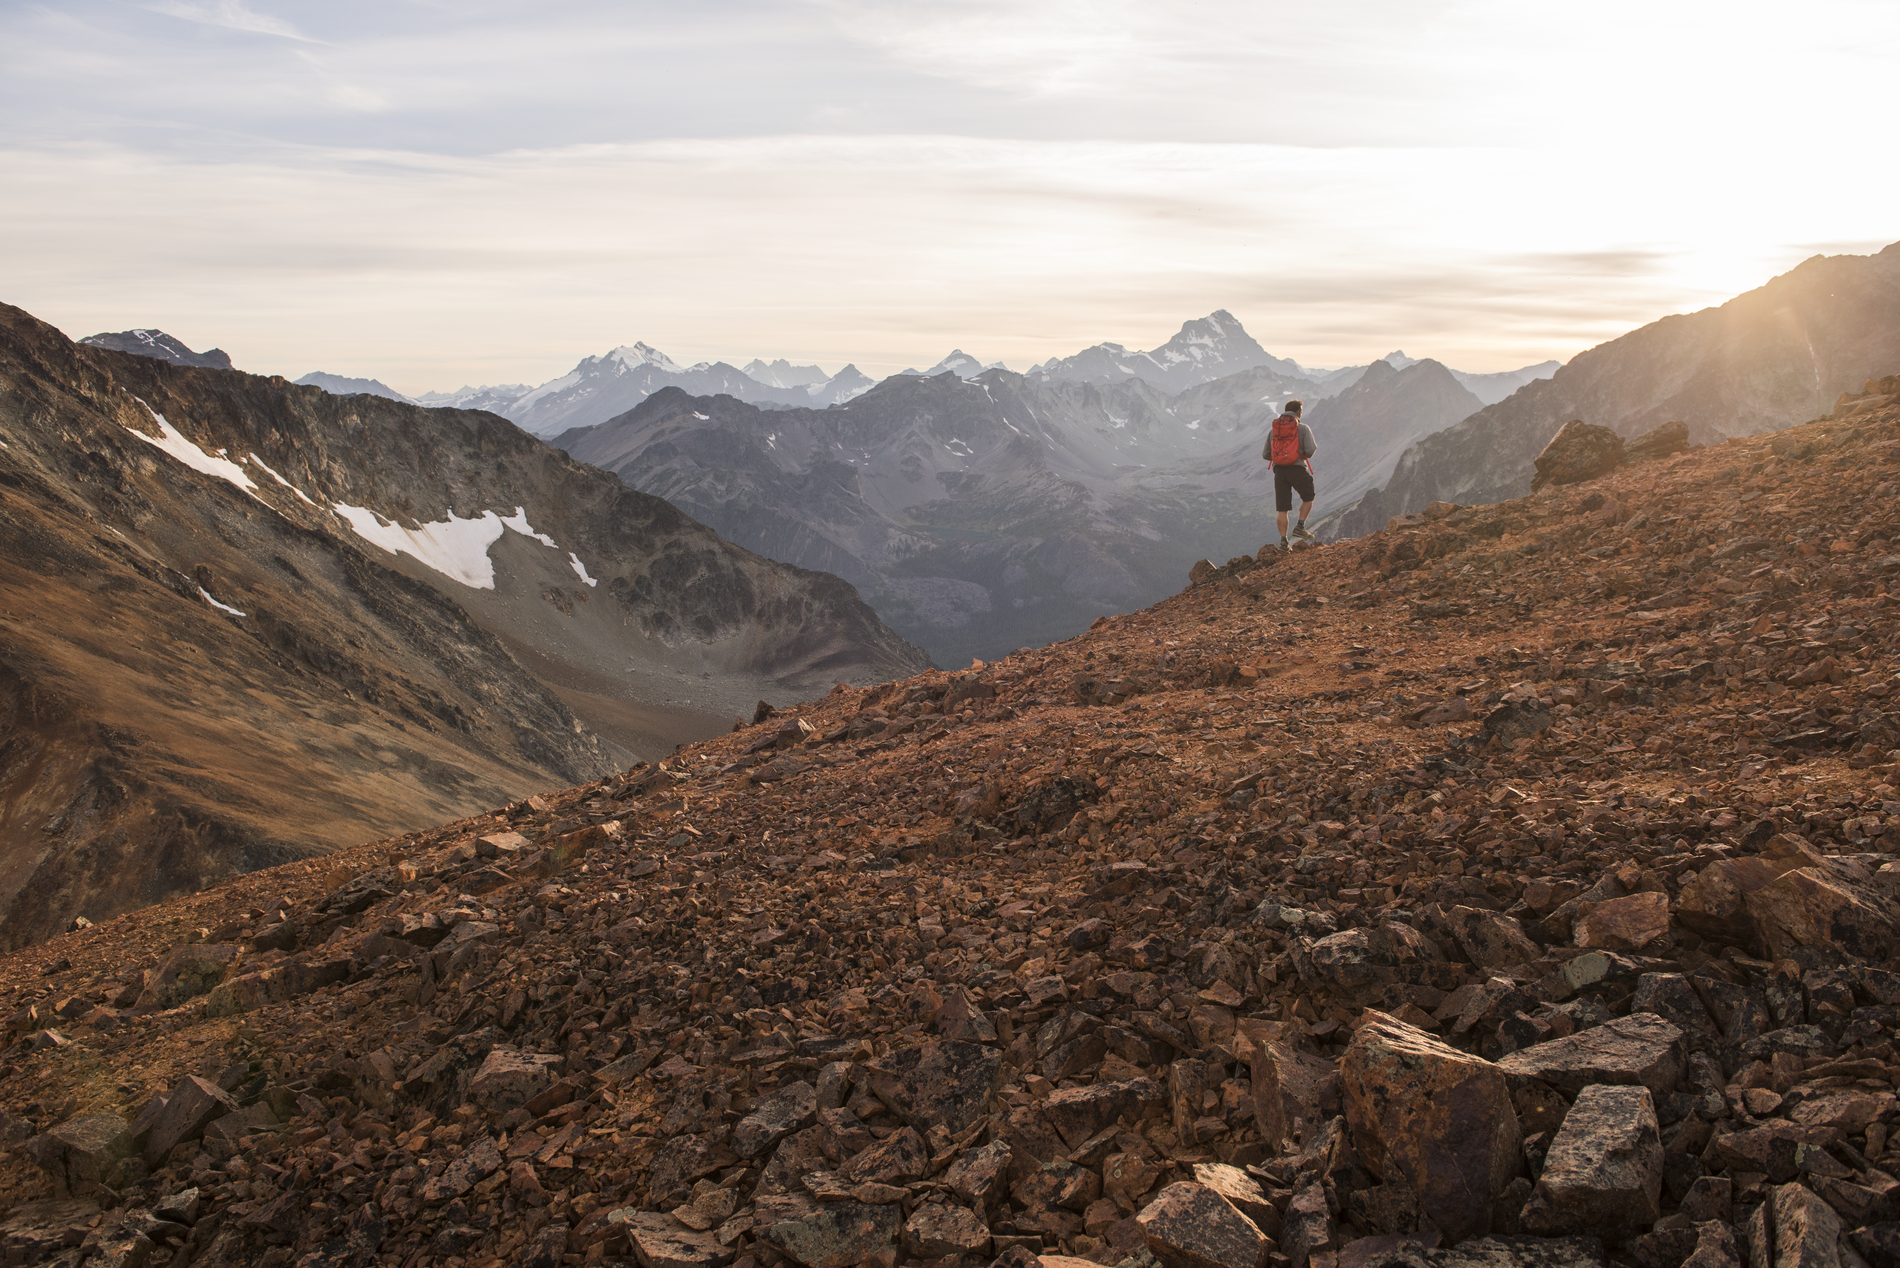 A hiker in the distance amid a rocky mountain landscape. The sun is setting in the range.